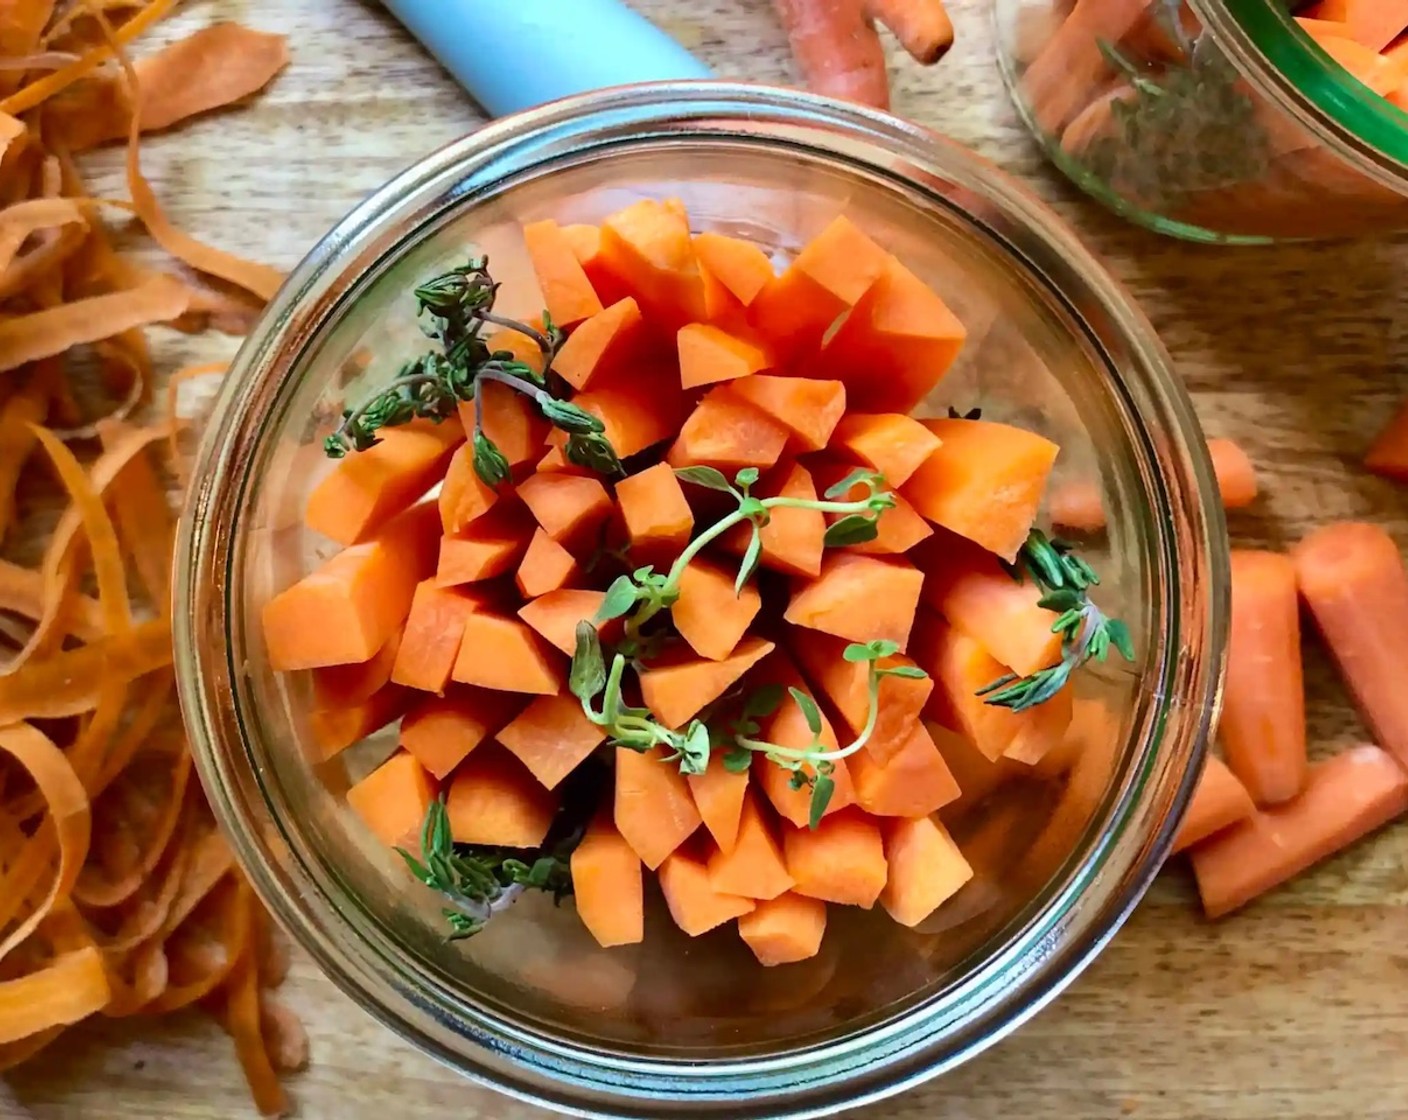 step 2 Based on the height of your jars, cut the Carrots (3 cups) into spears measuring 3/4-inch less than the height of each jar. Place the carrot spears on the end, filling each jar. Place the Fresh Thyme (6 sprigs) evenly throughout each jar as you fill it.